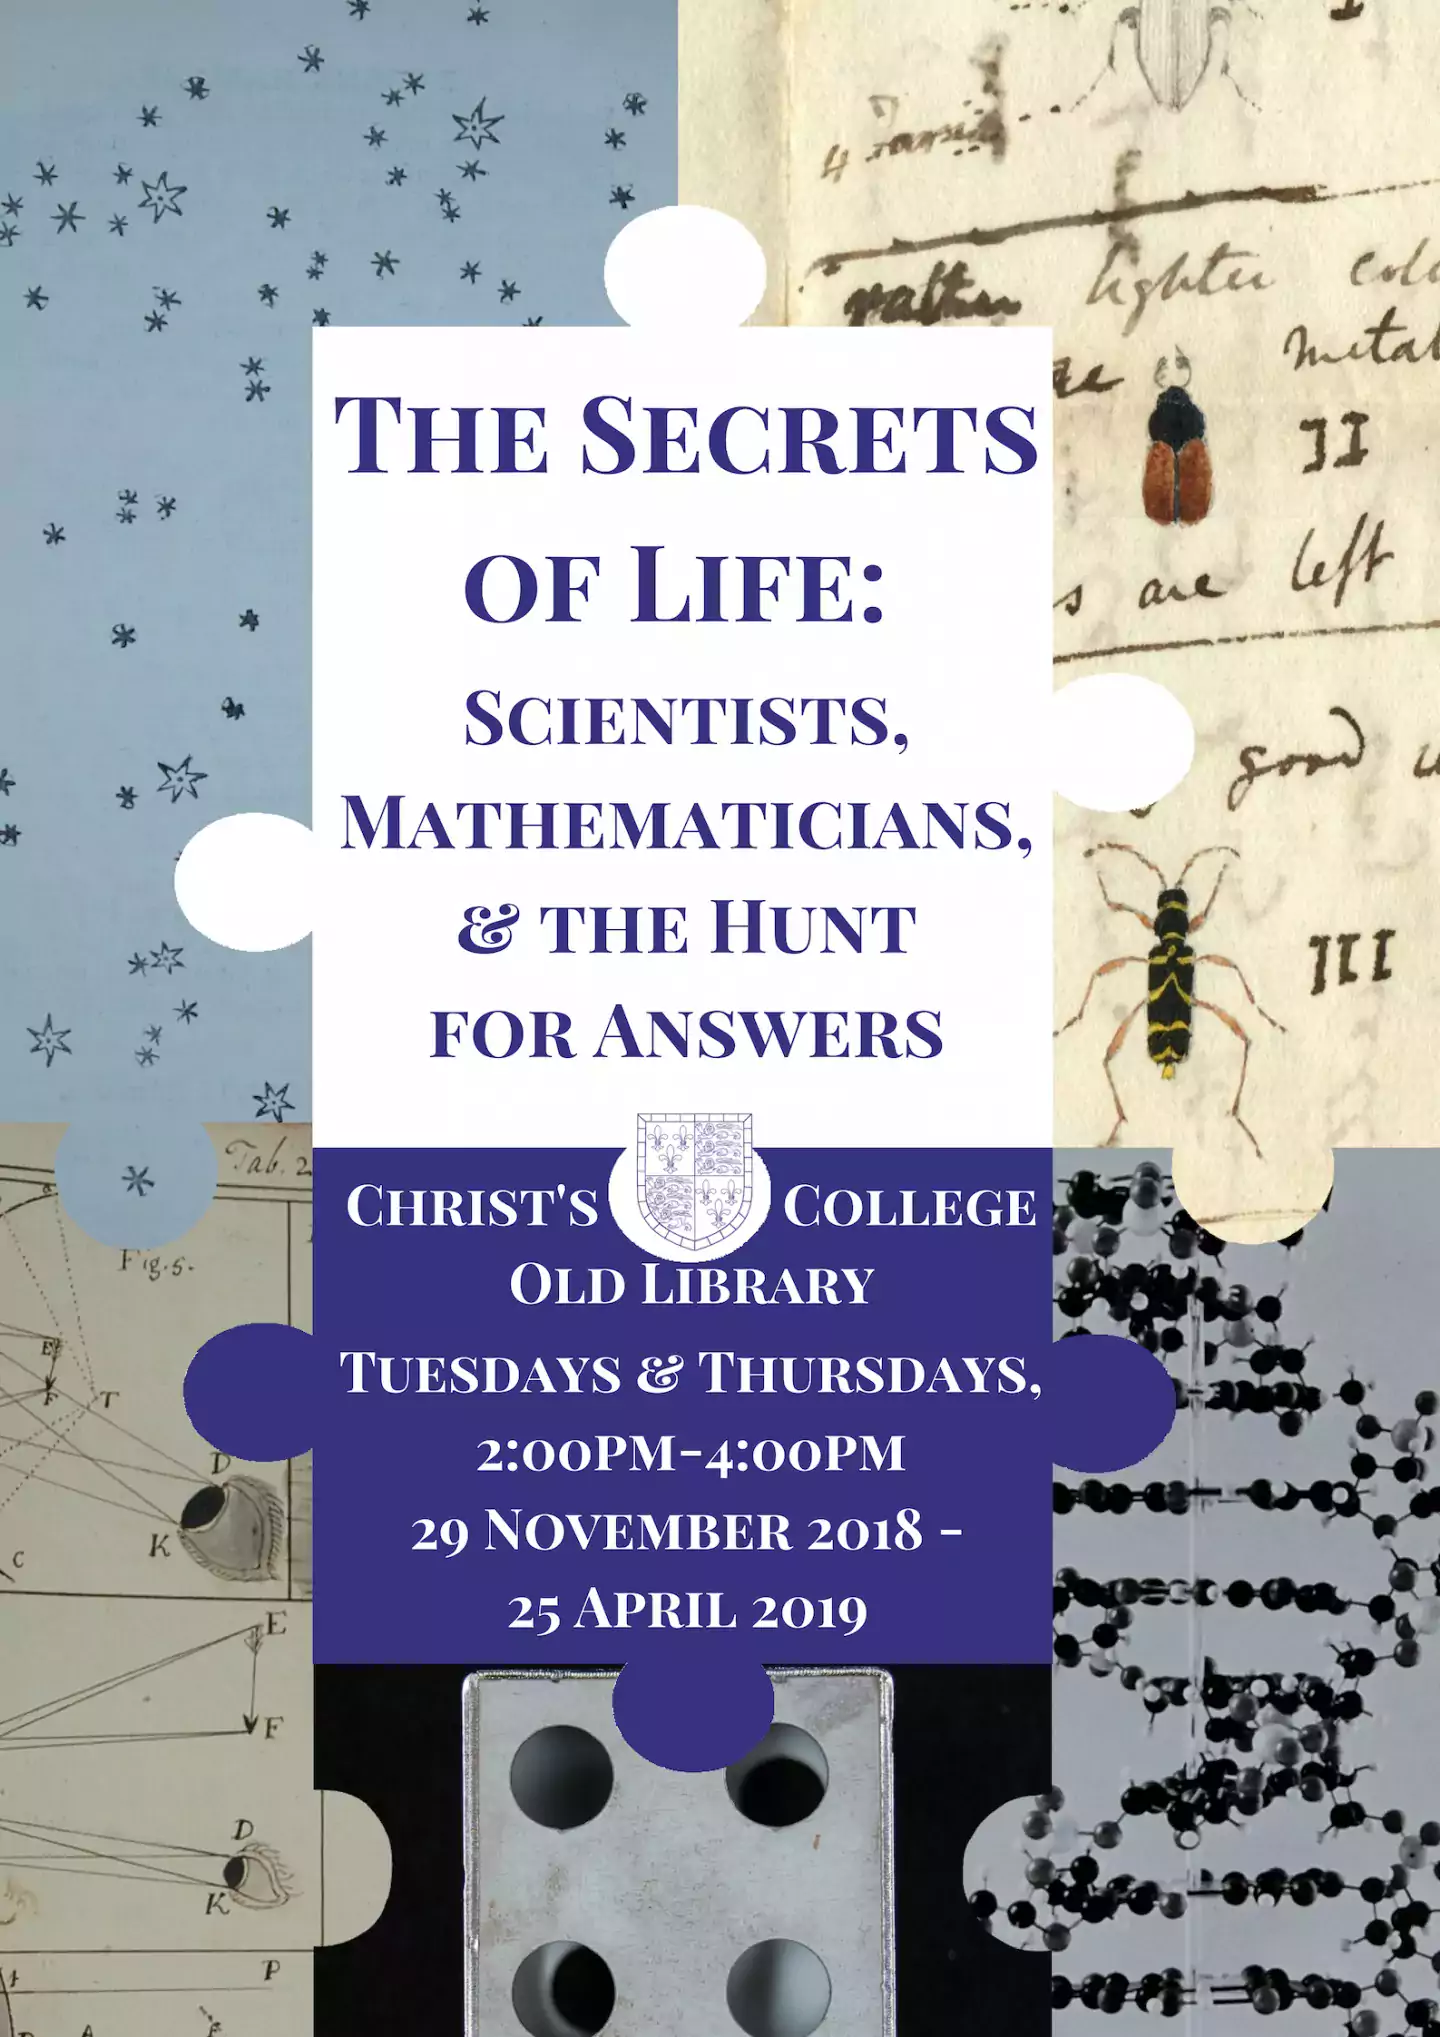 Poster for "The Secrets of Life: Scientists, Mathematicians, & the Hunt for Answers"